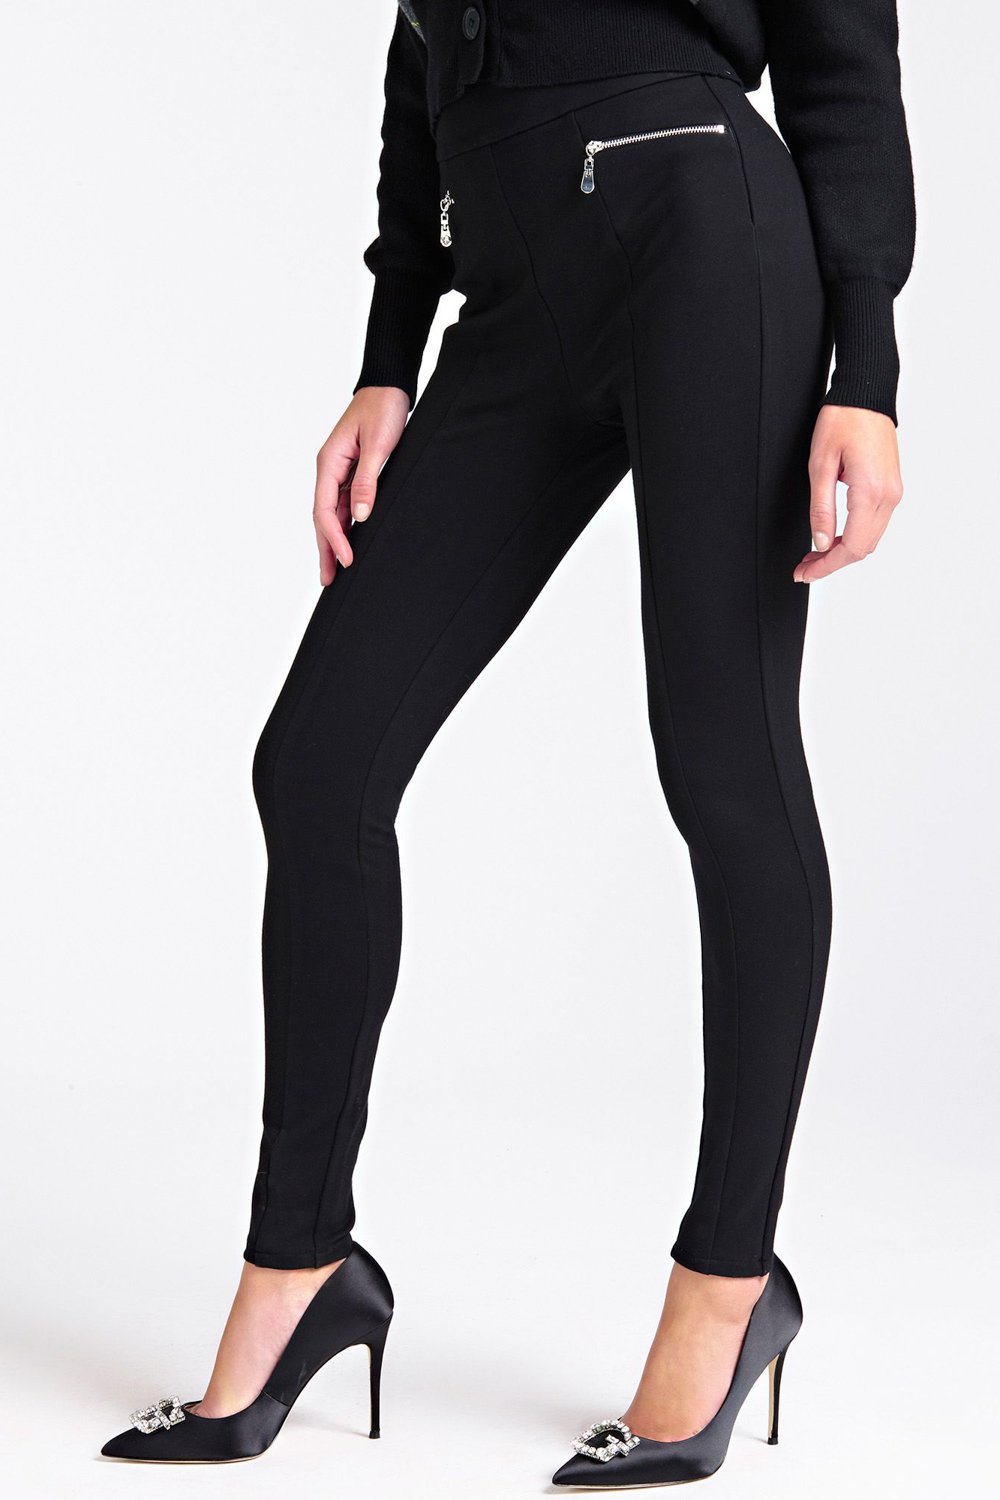 GUESS Leggings - Ponte and Faux Leather